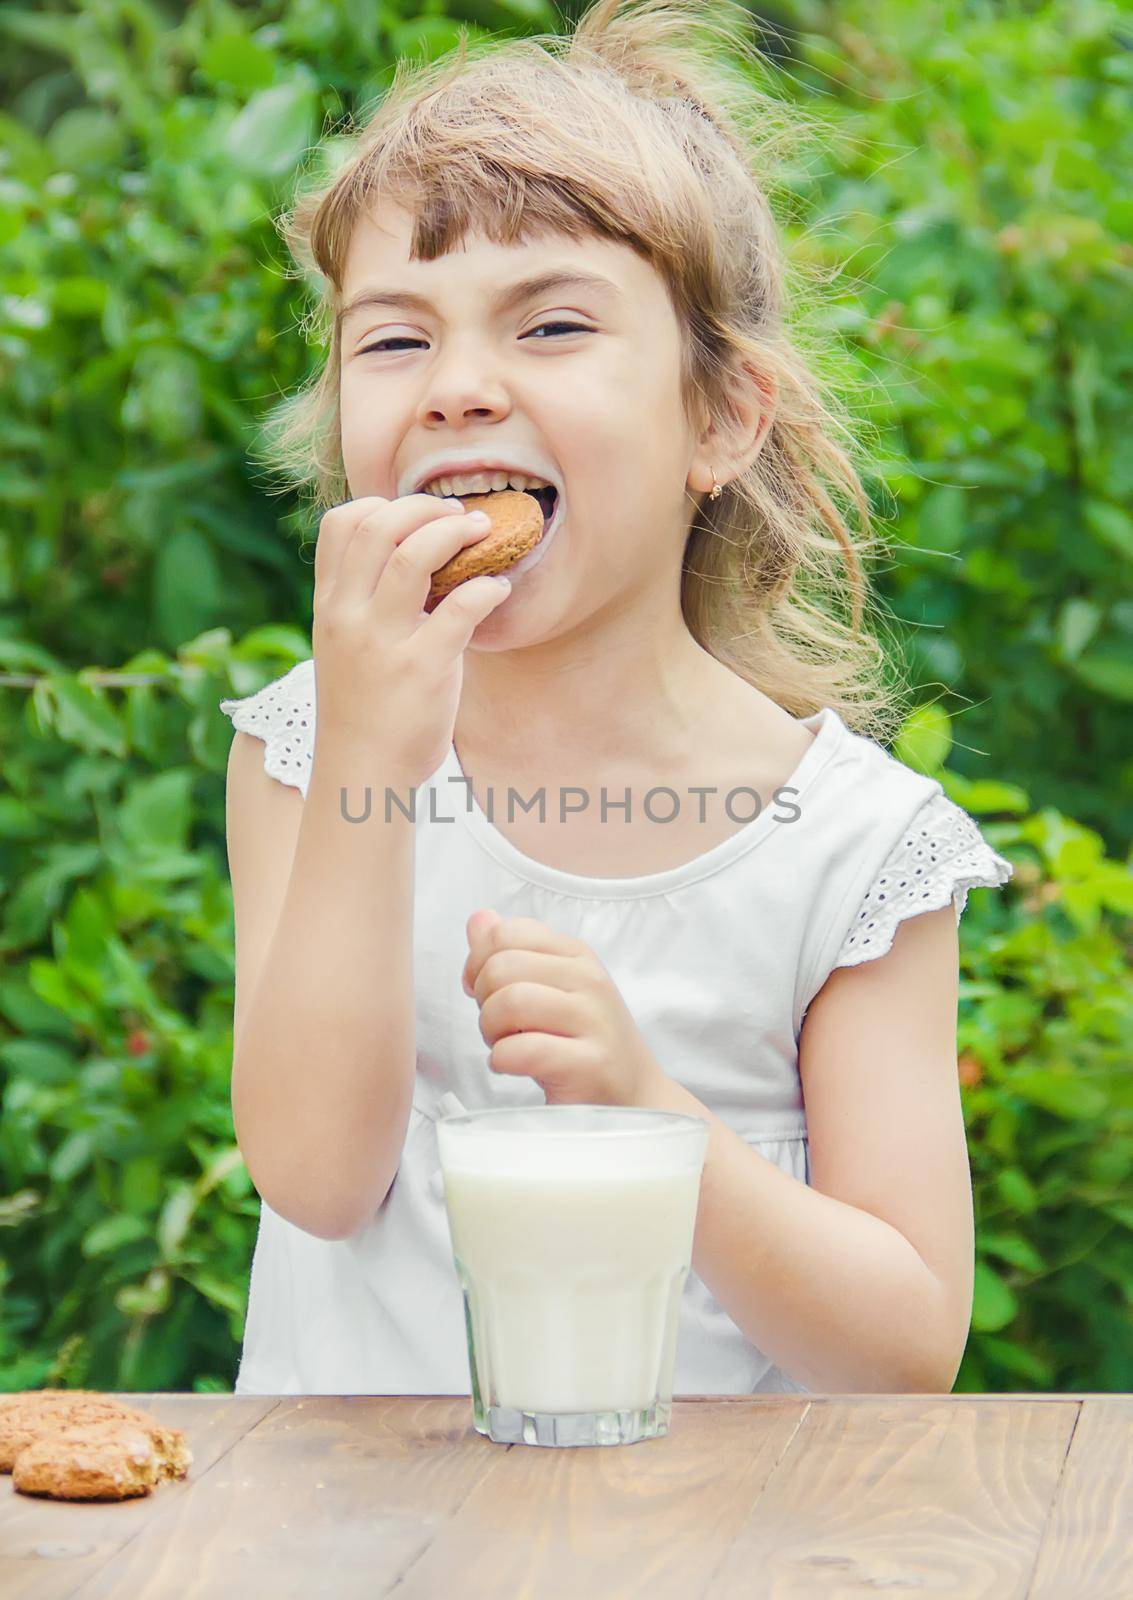 The child drinks milk and cookies. Selective focus.